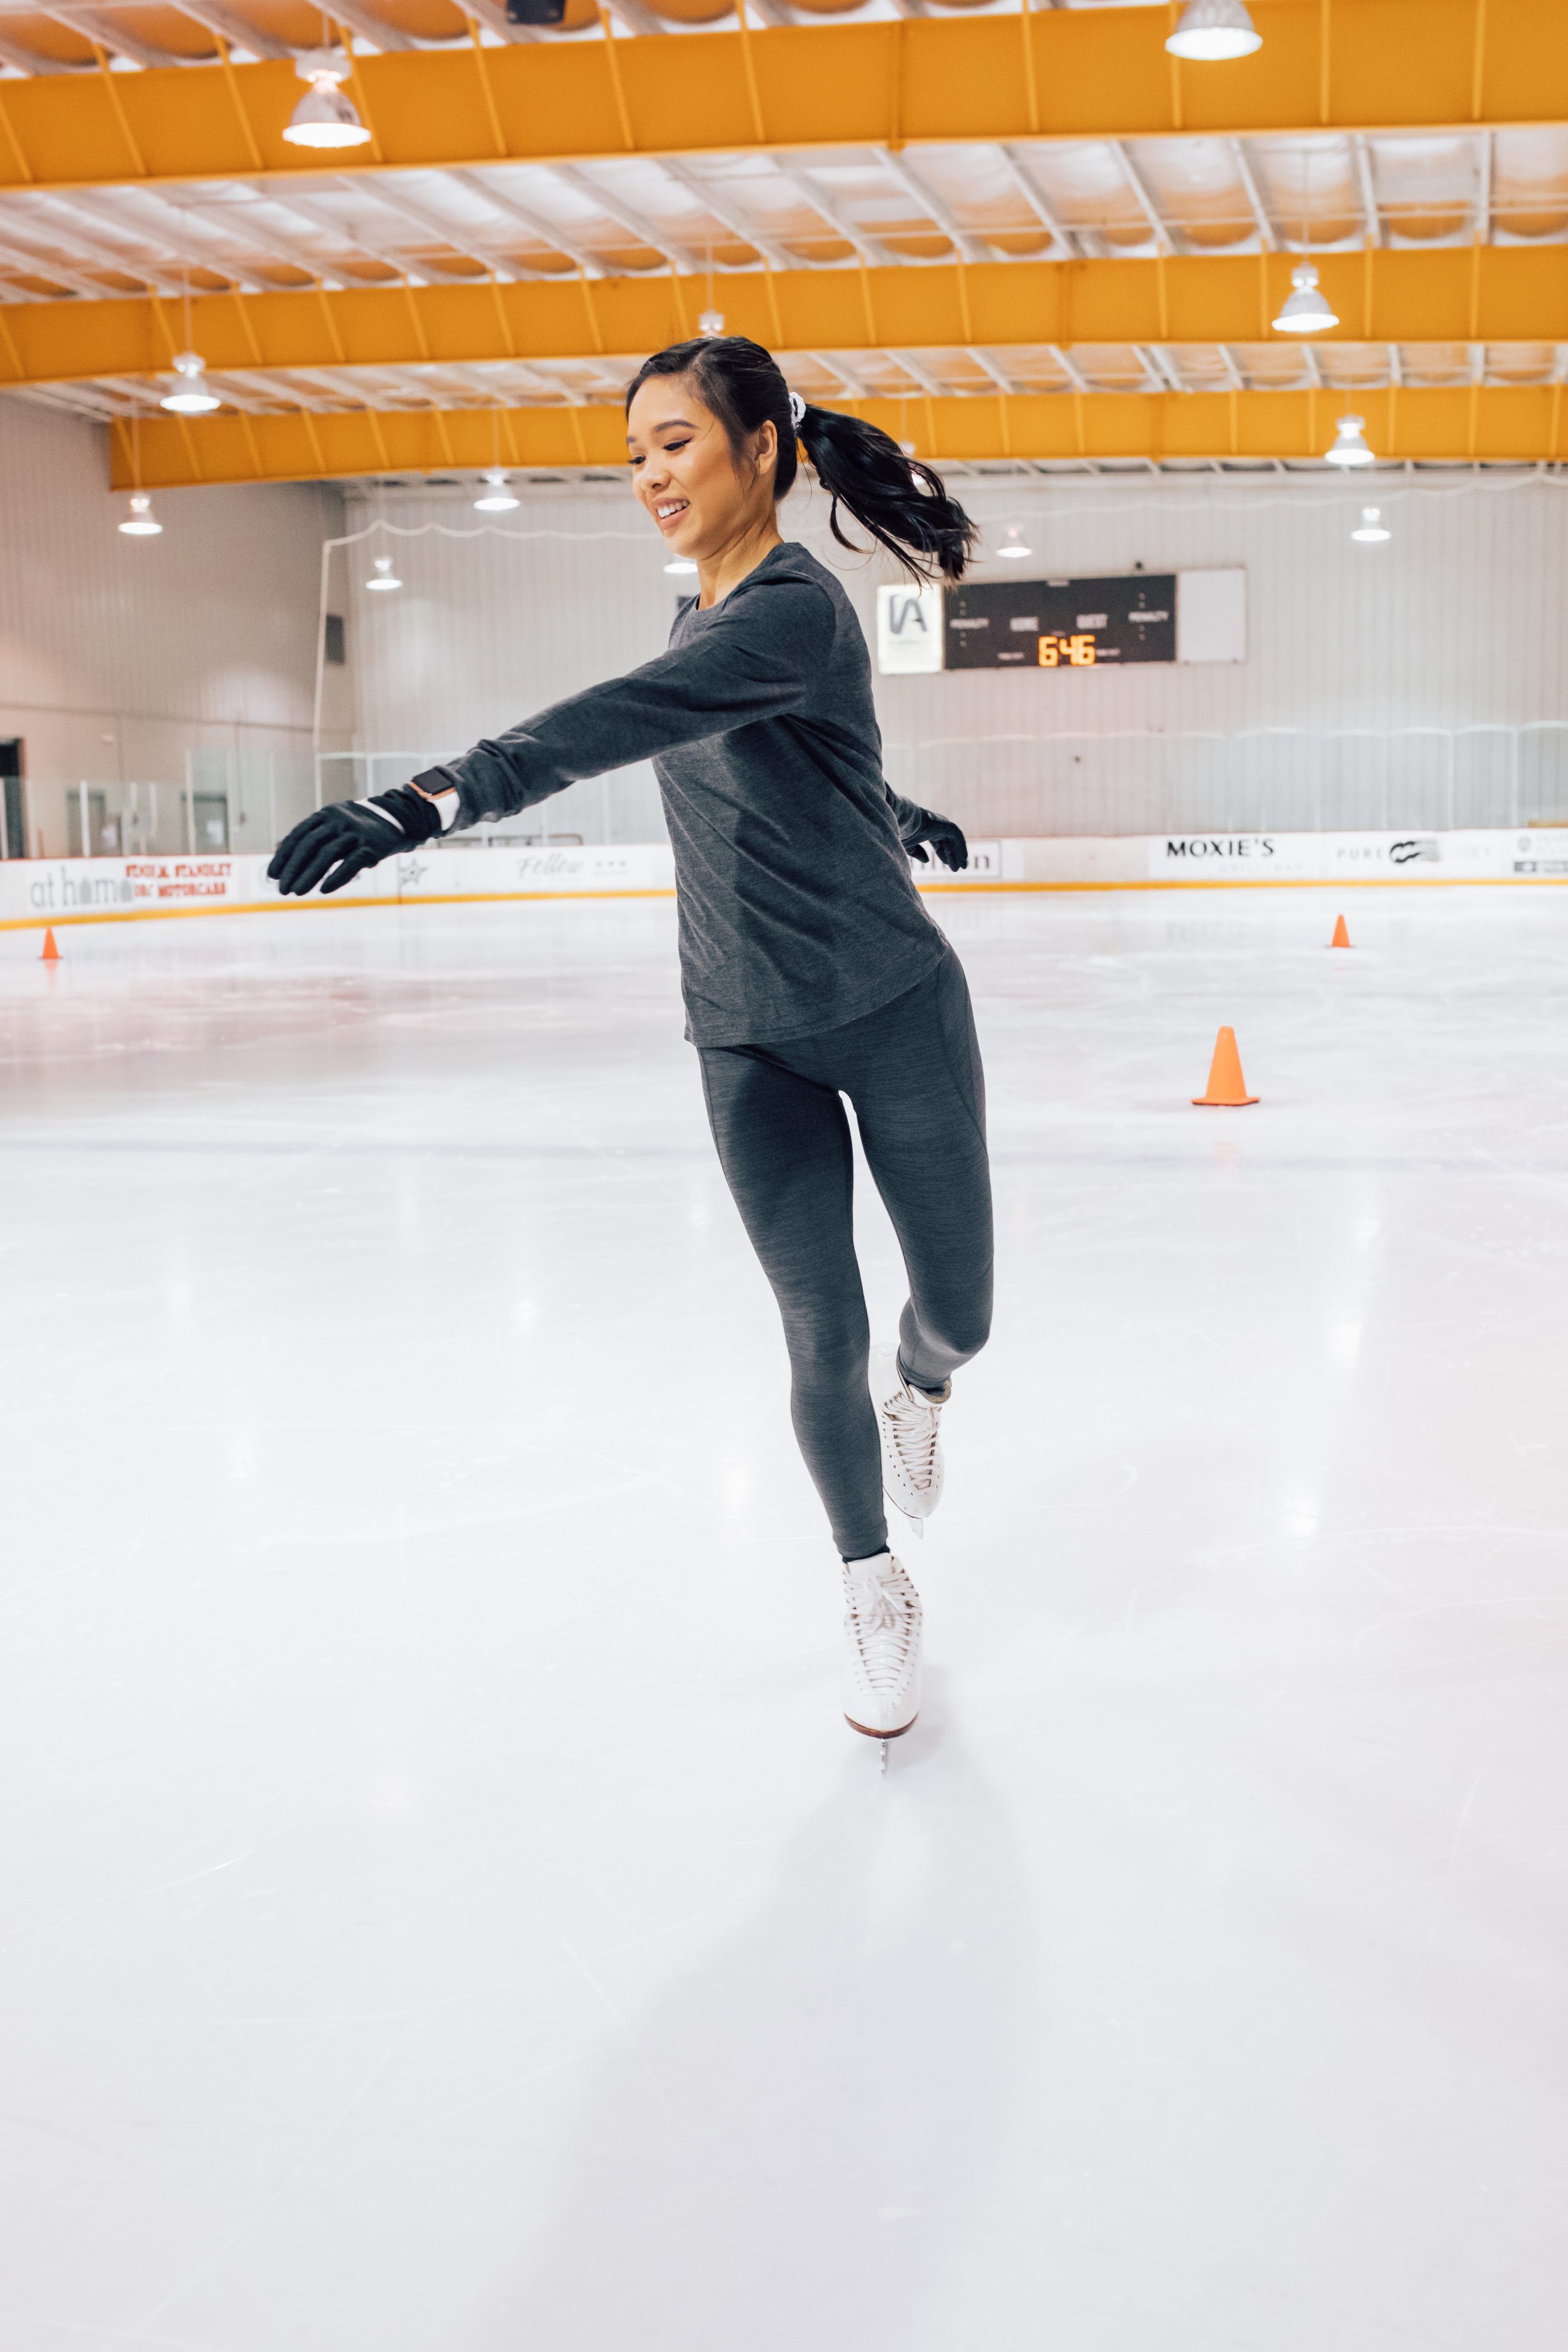 Adult figure skater Hoang-Kim wears outdoor voices tech sweat to the rink